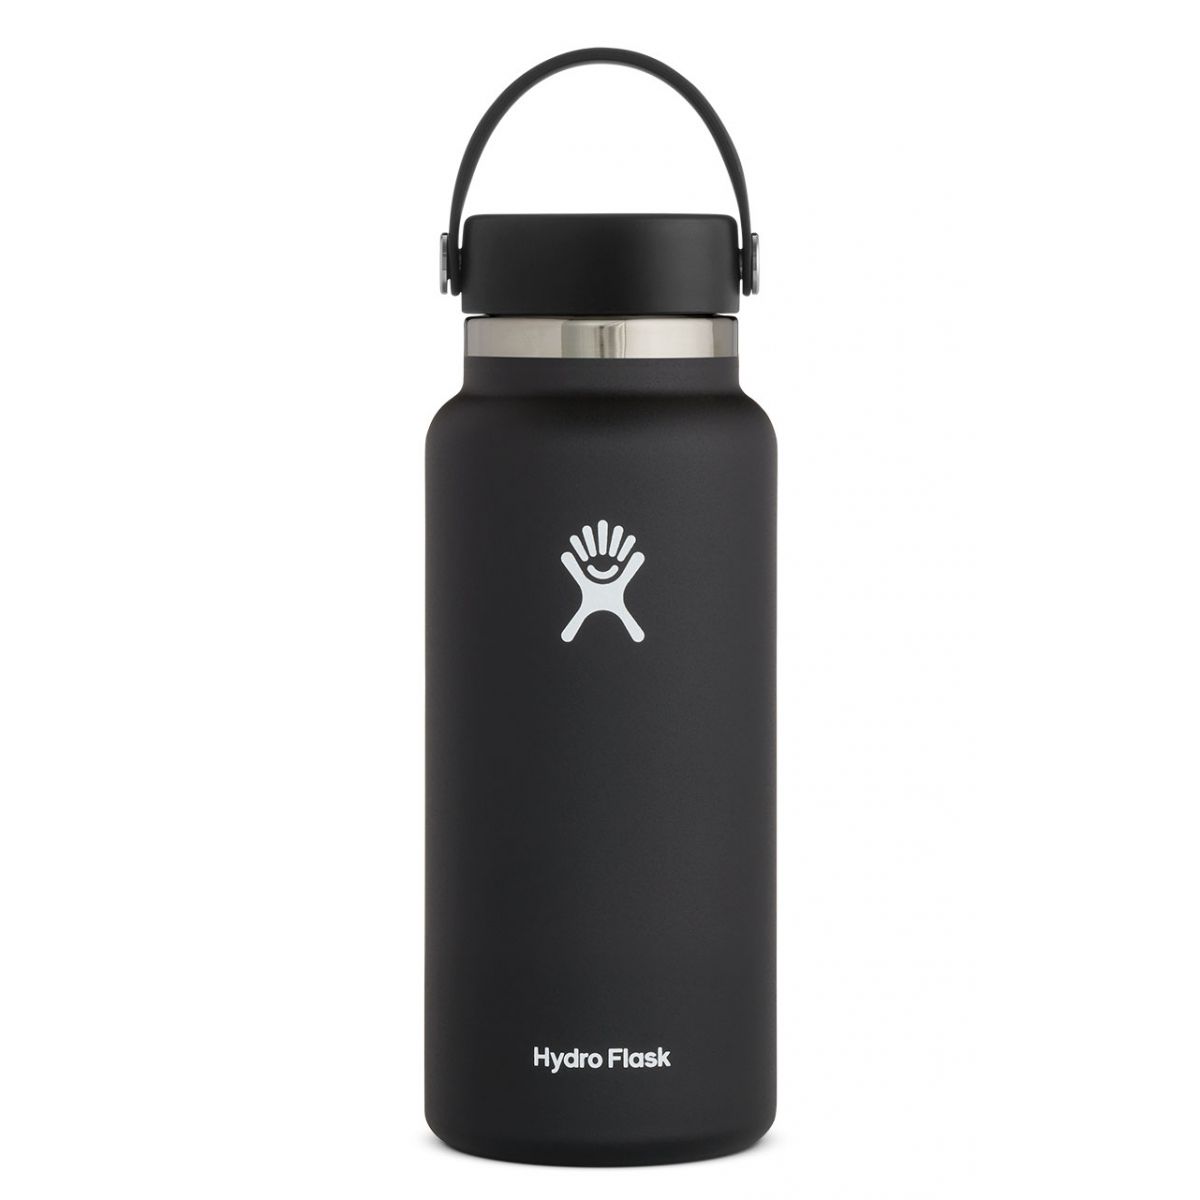  Hydro Flask Wide Mouth Lids- Accessory for Wide Mouth